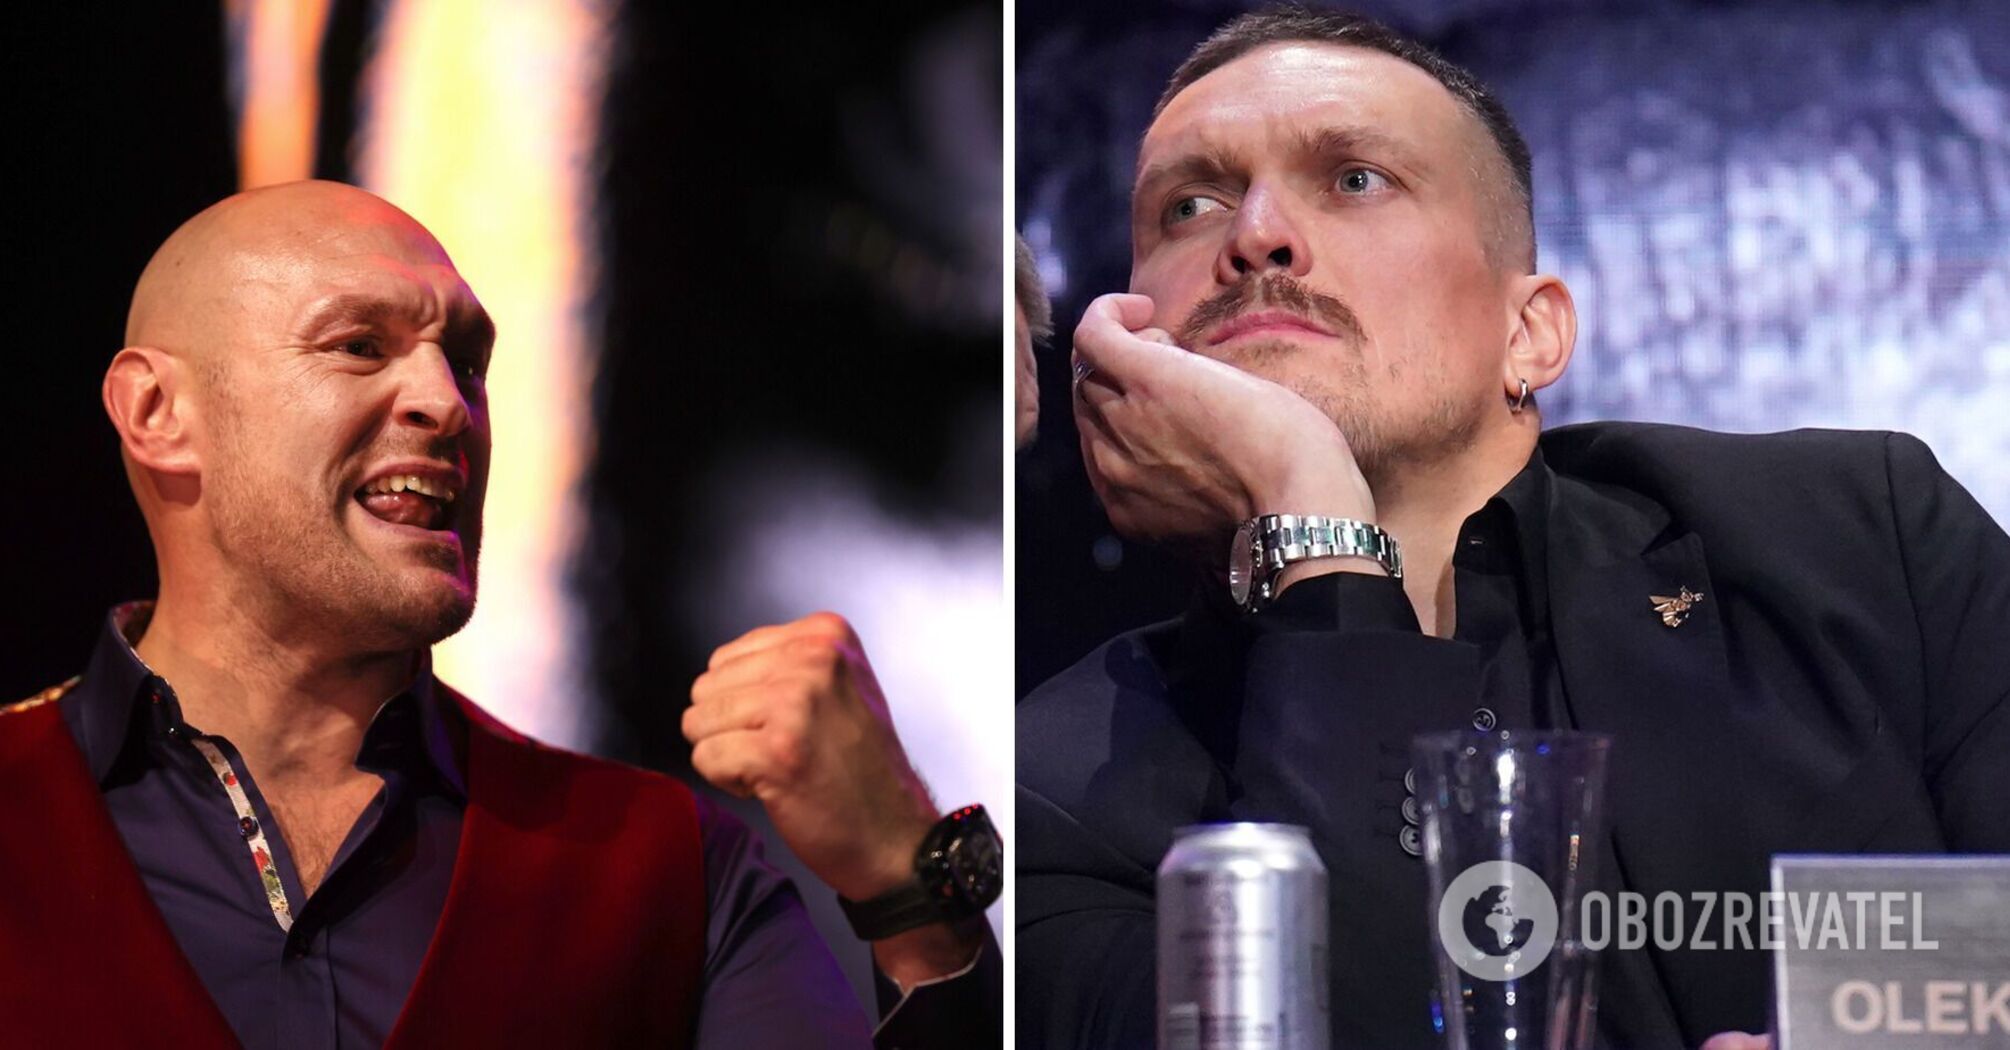 'There will be blood everywhere': Fury vows to 'beat the stupid sausage' Usyk